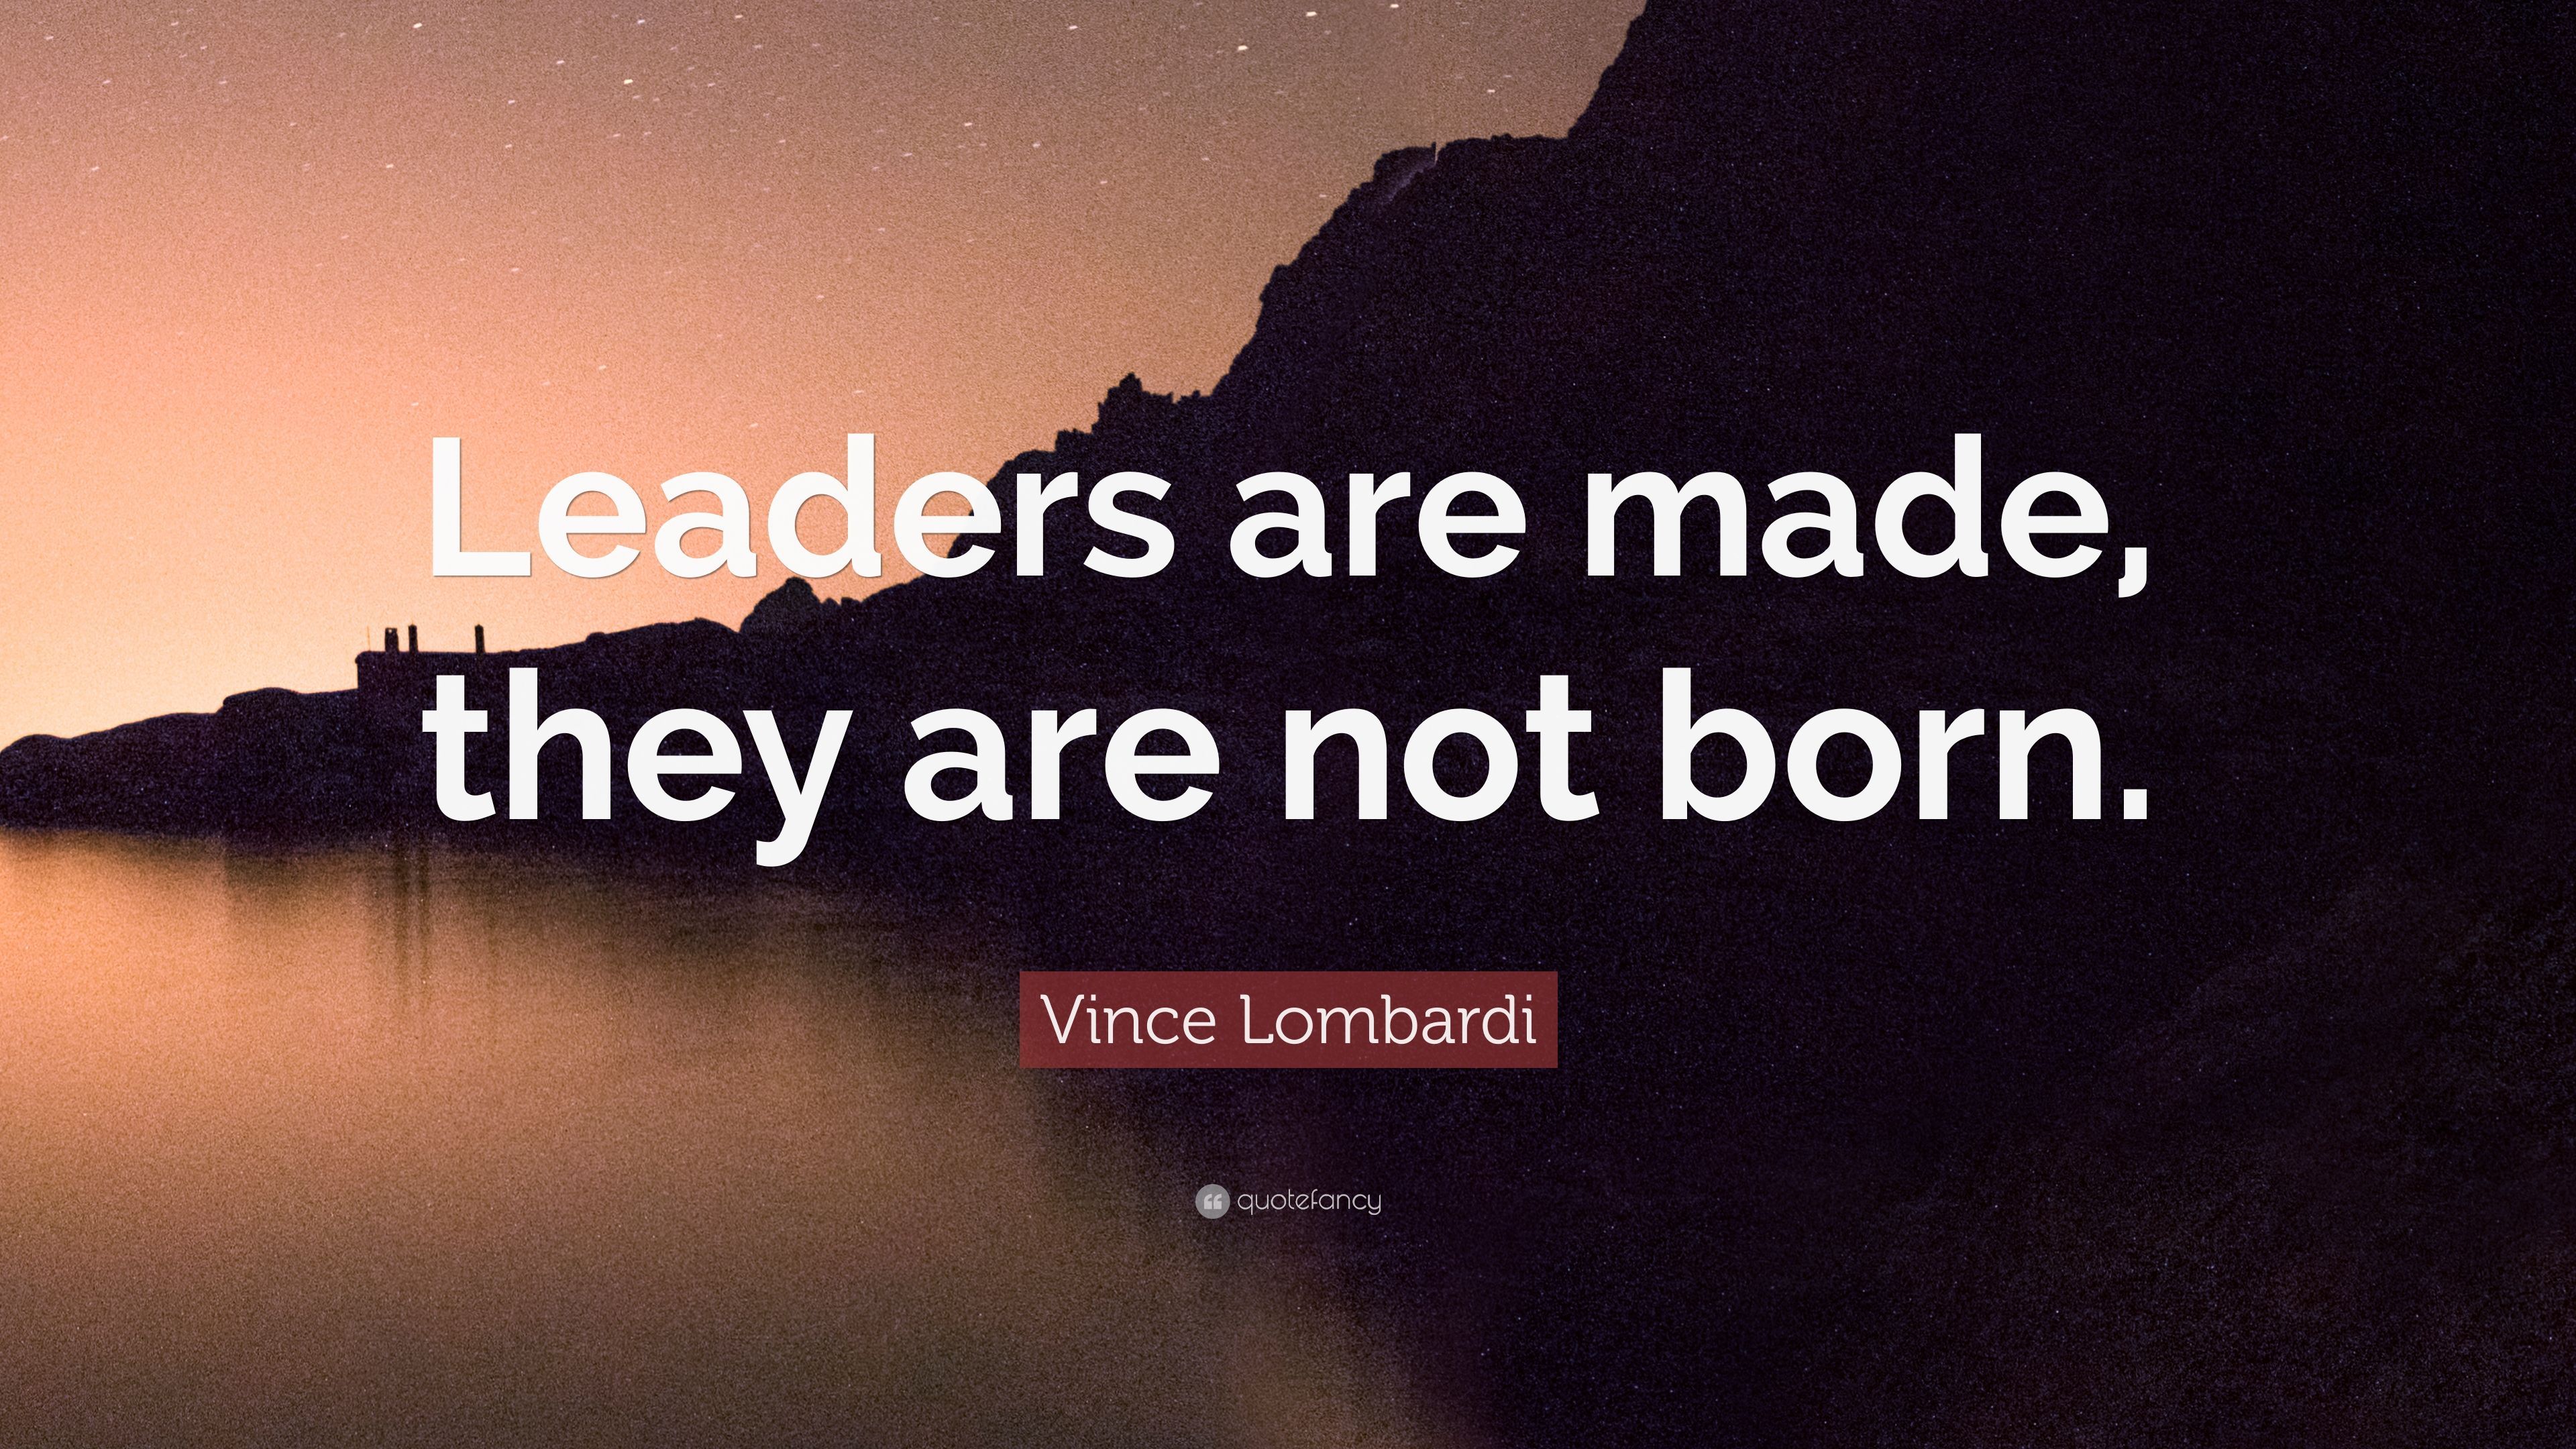 Vince Lombardi Quote: “Leaders are made, they are not born.” 12